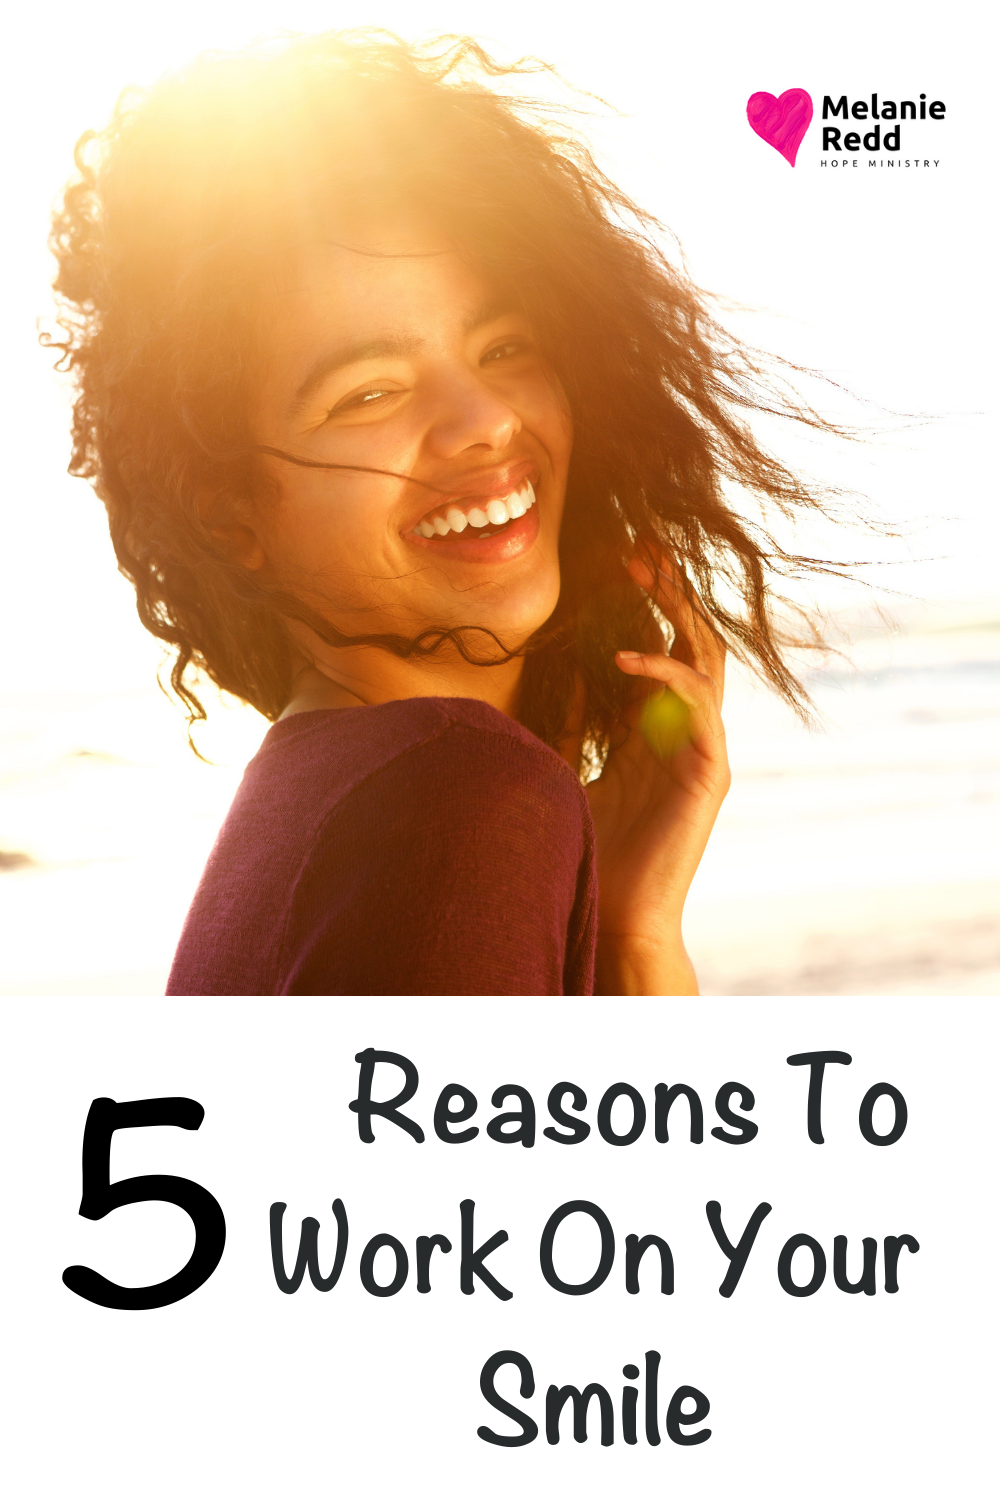 A Smile. It's a beautiful thing. In fact, it is usually what people notice first about us. Here are 5 reasons to work on your smile.